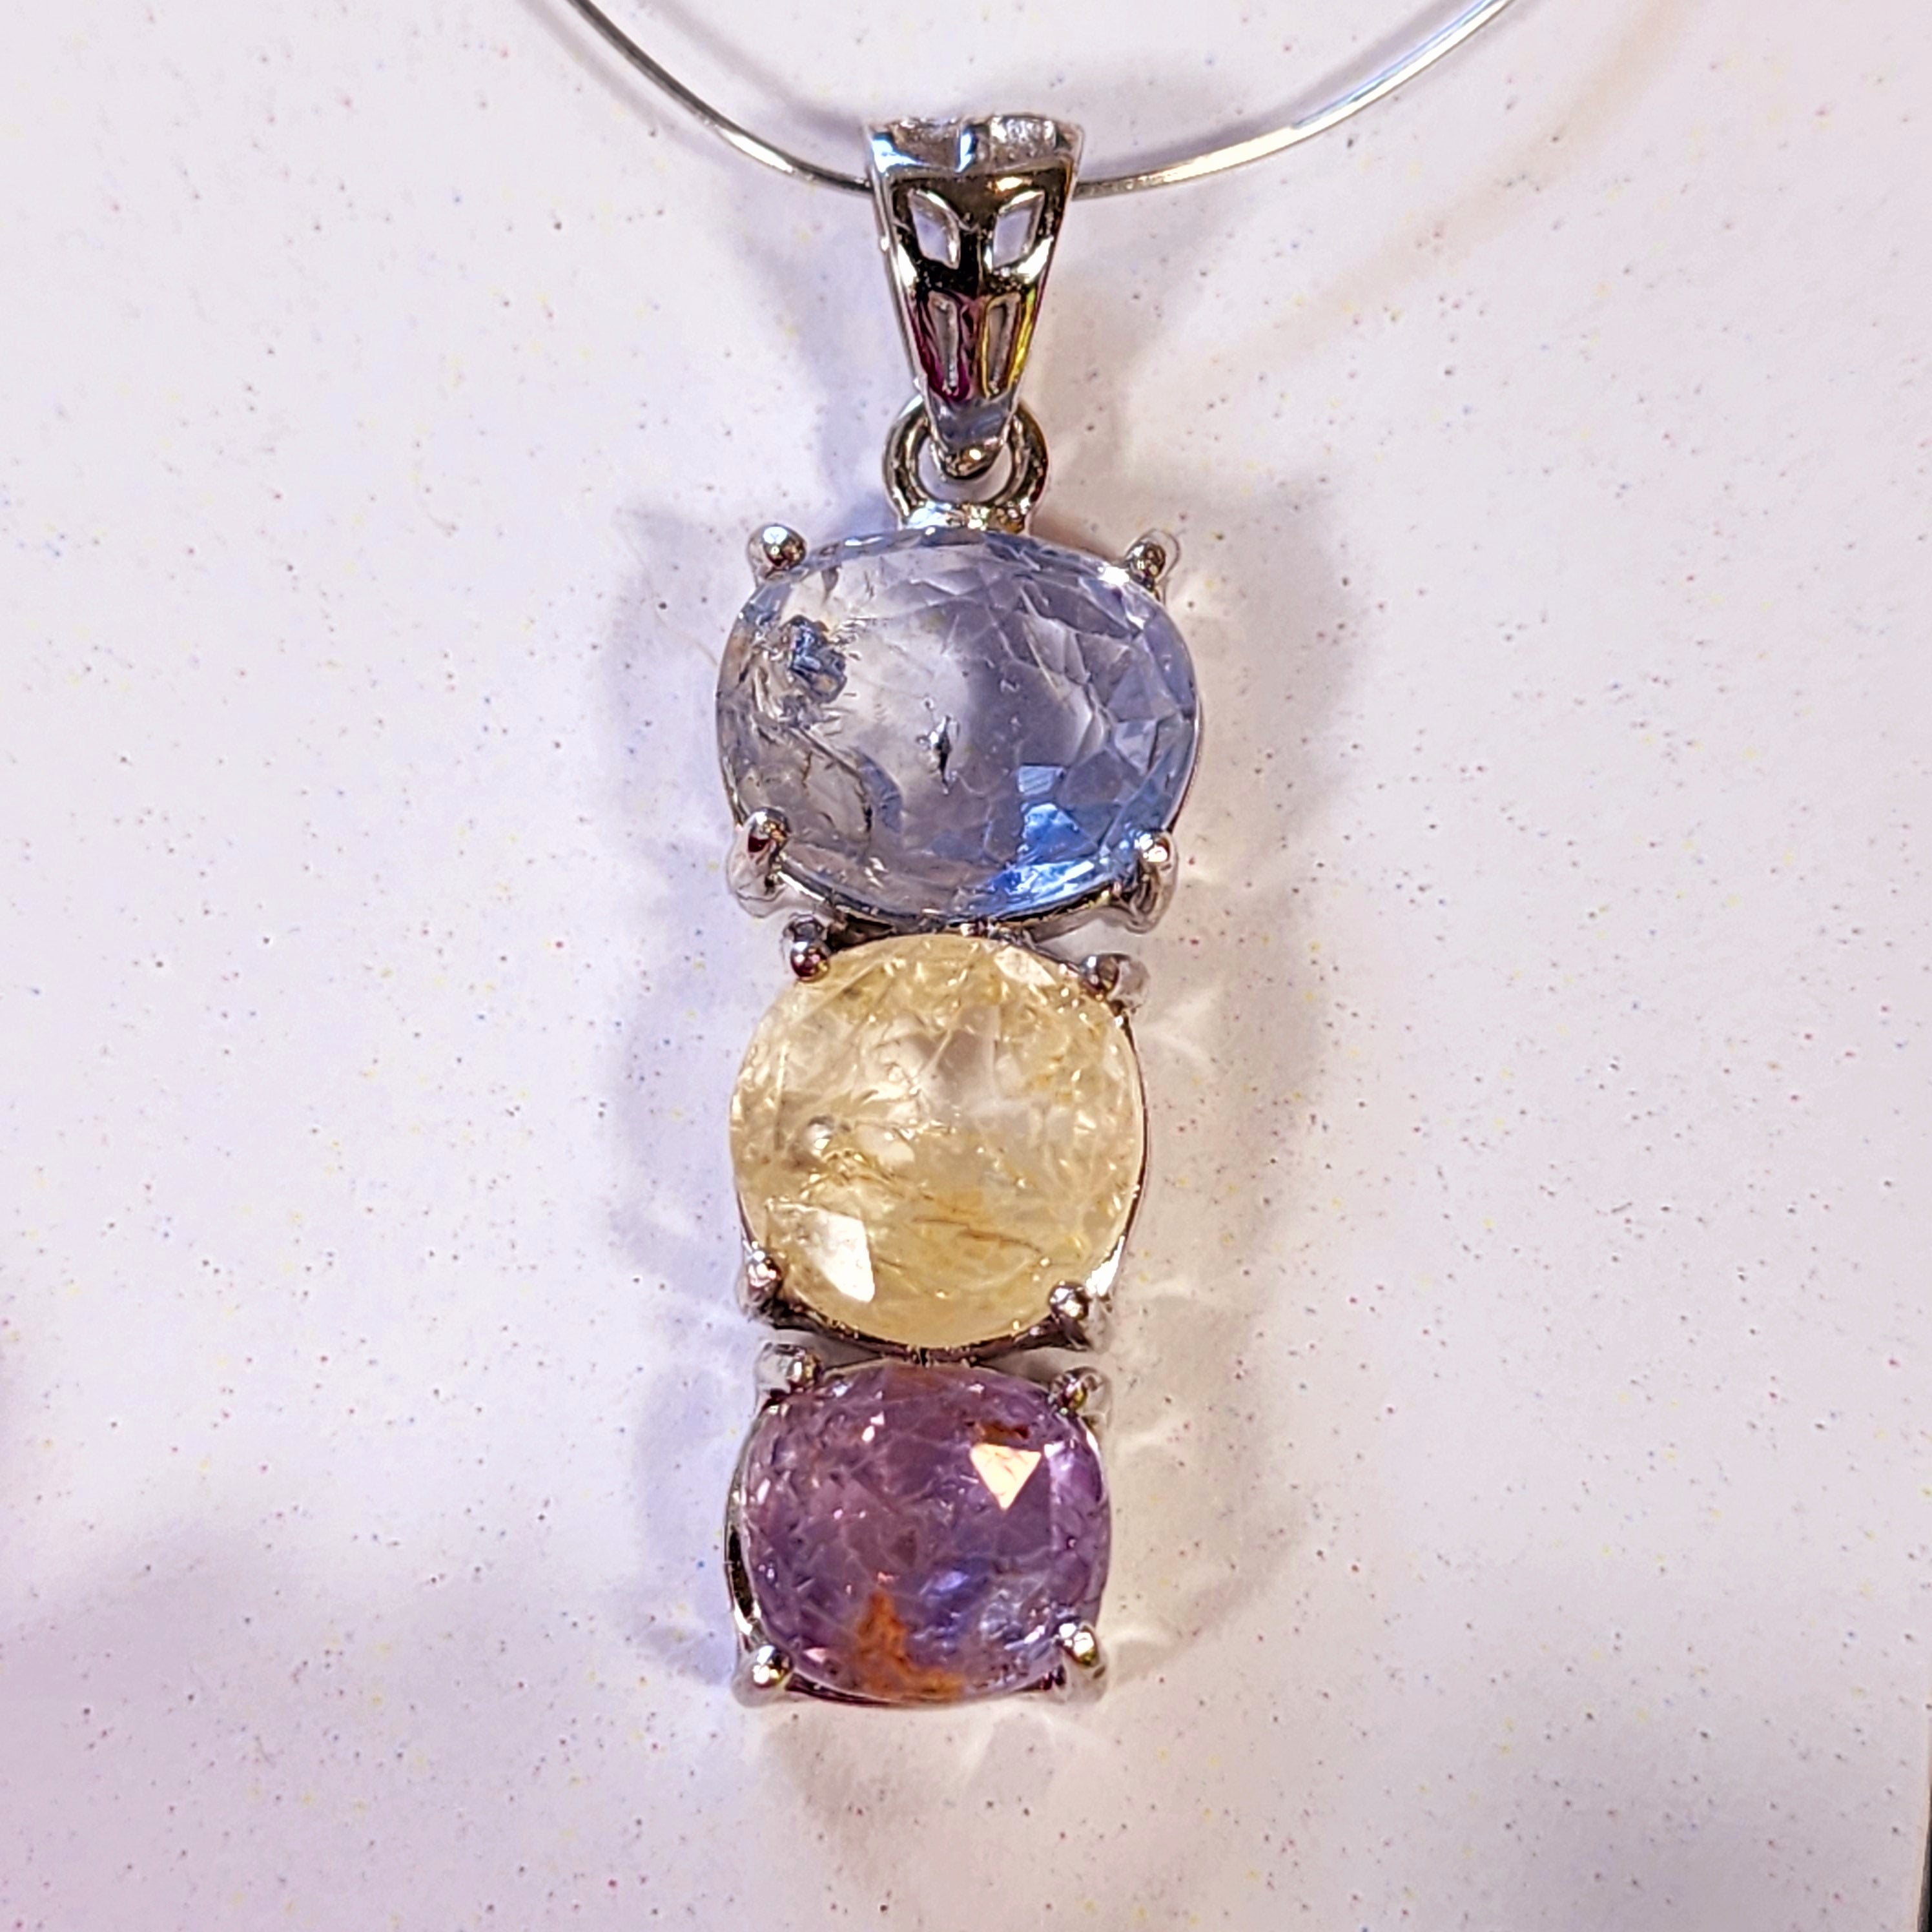 Corundum Dream Ruby, Blue Sapphire & Yellow Sapphire .925 Silver Pendant for Intuition, Good Luck and Revitalizing your Passion for Life